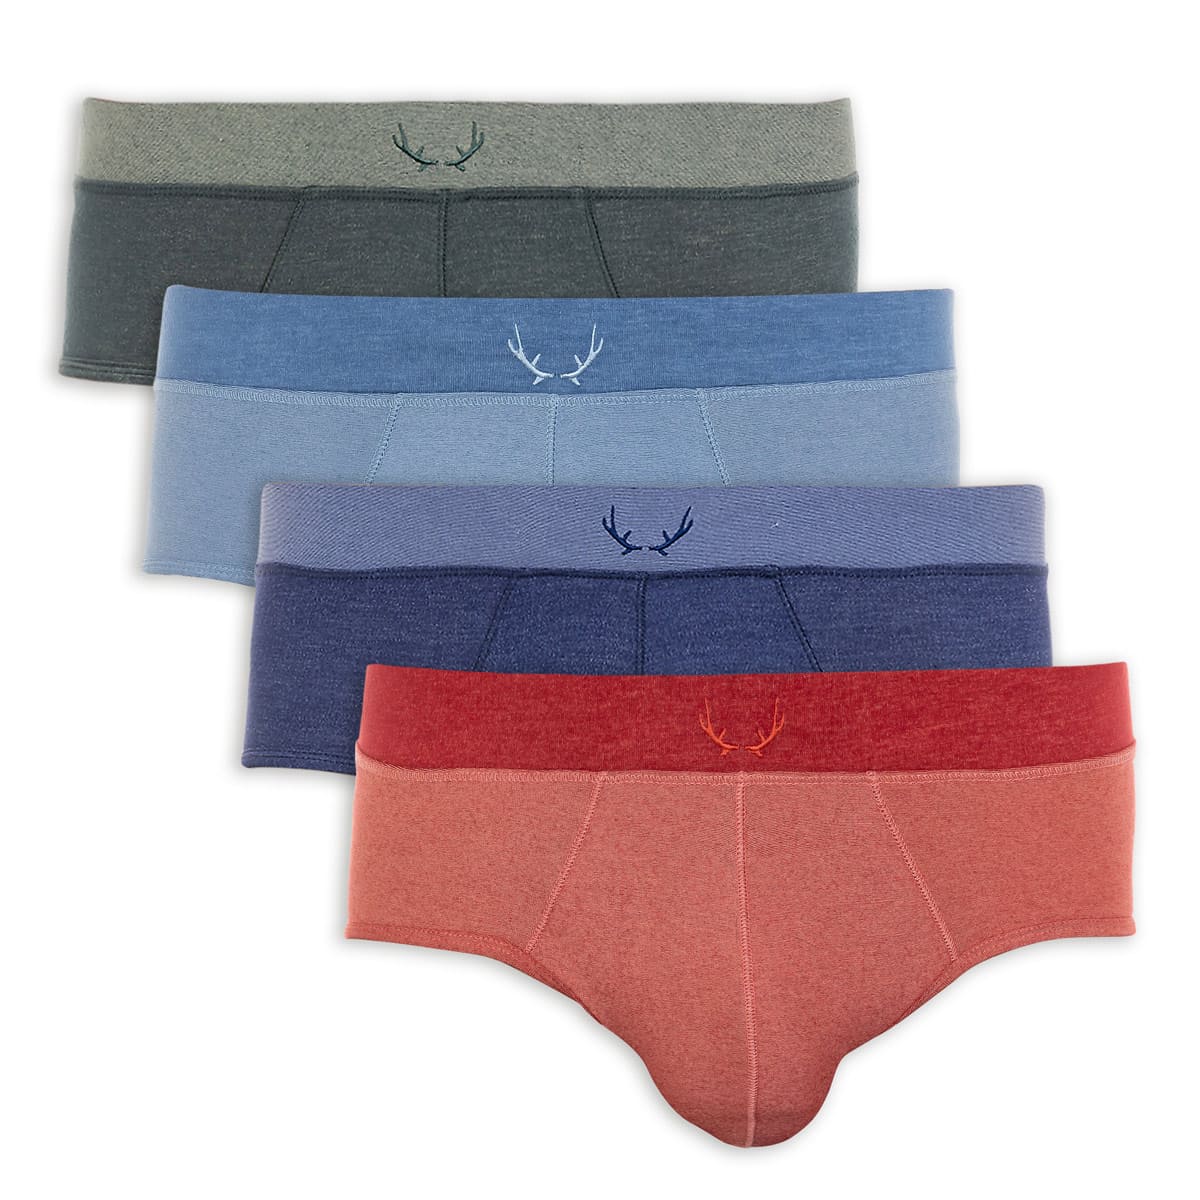 4-pack of underpants made from Tencel by Bluebuck